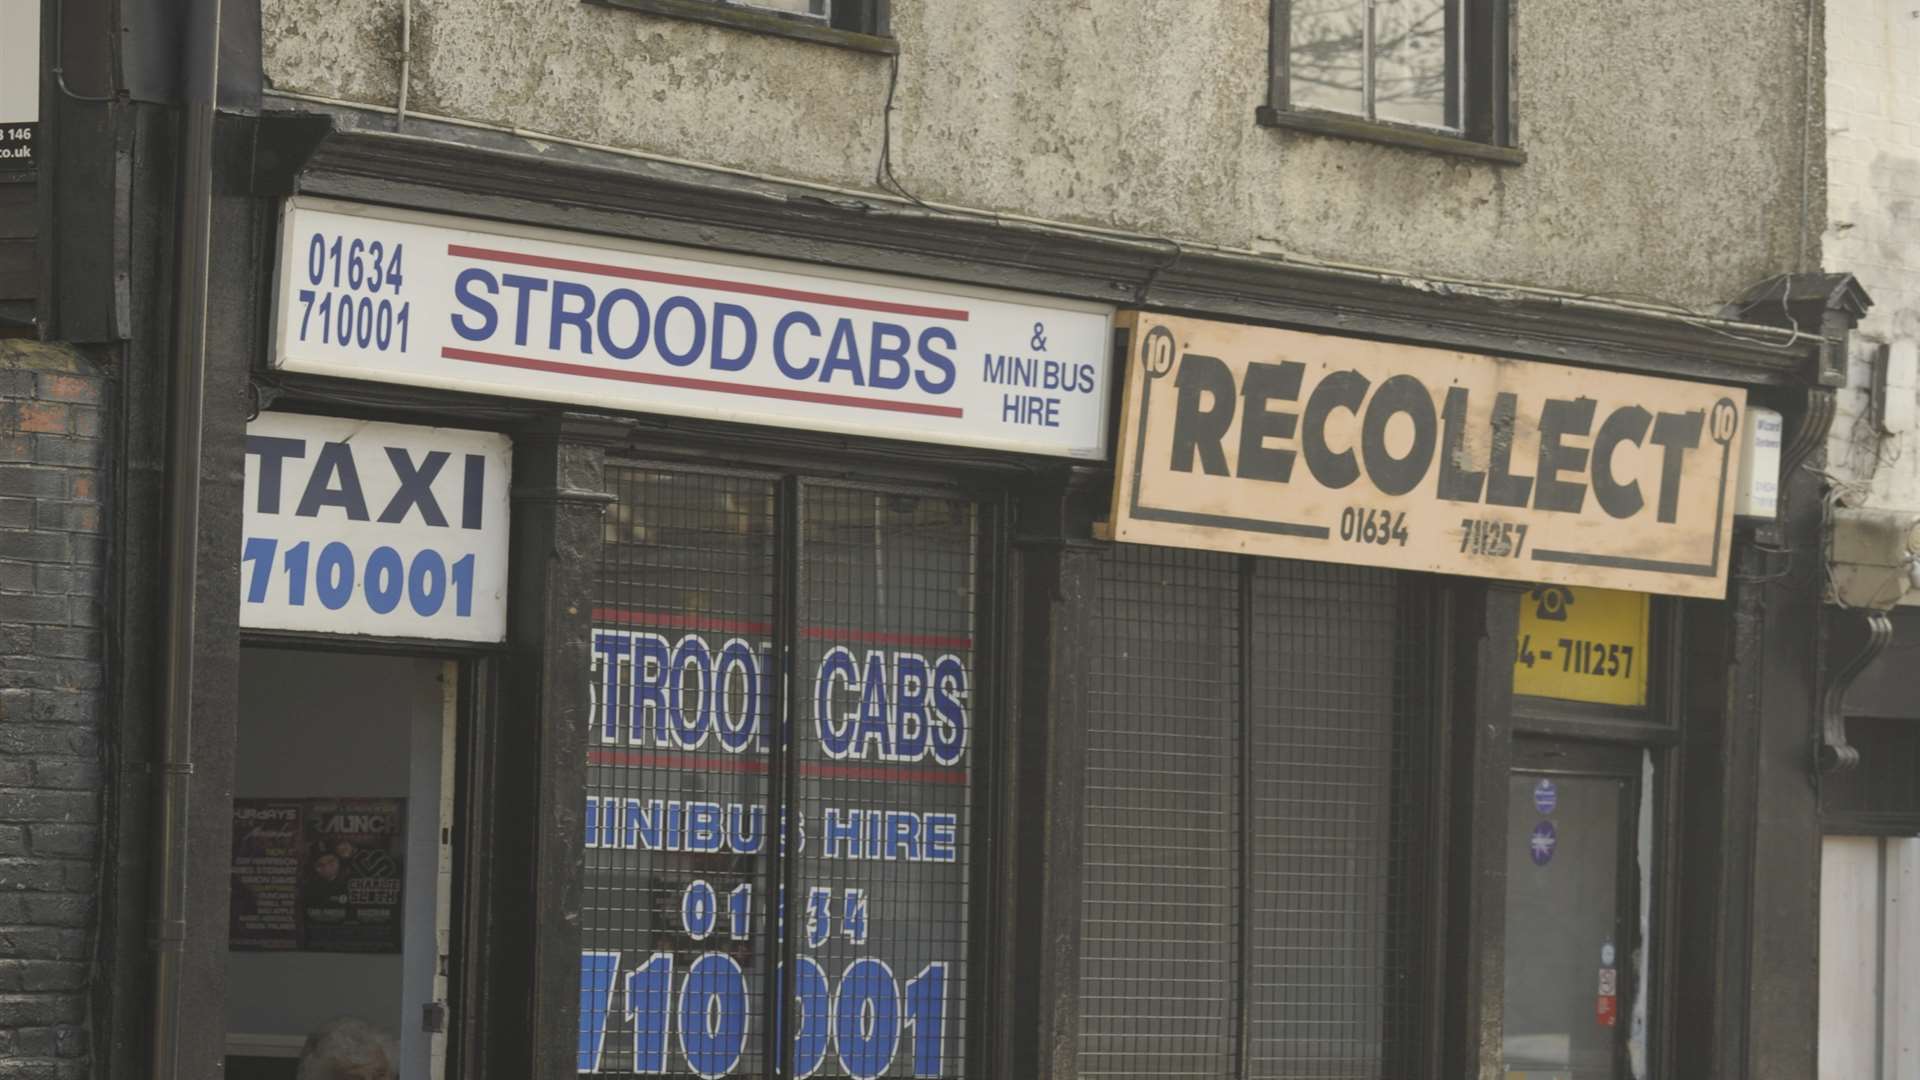 Strood Cabs was highlighted in the investigation